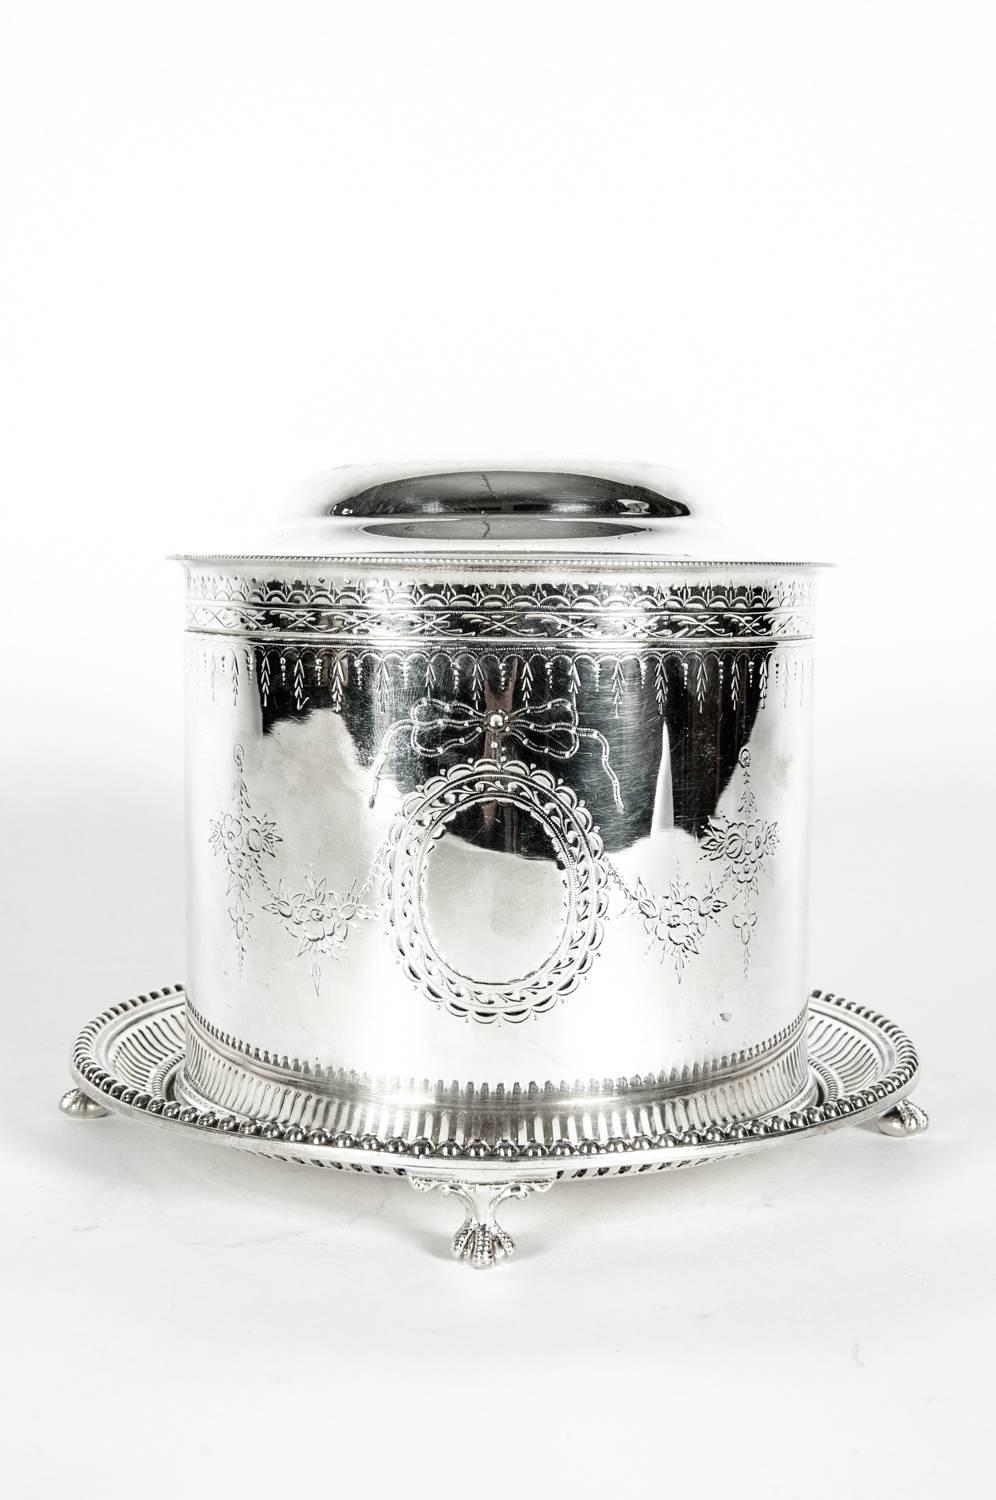 English Silver Plate Covered Biscuit Box / Tea Caddy 4